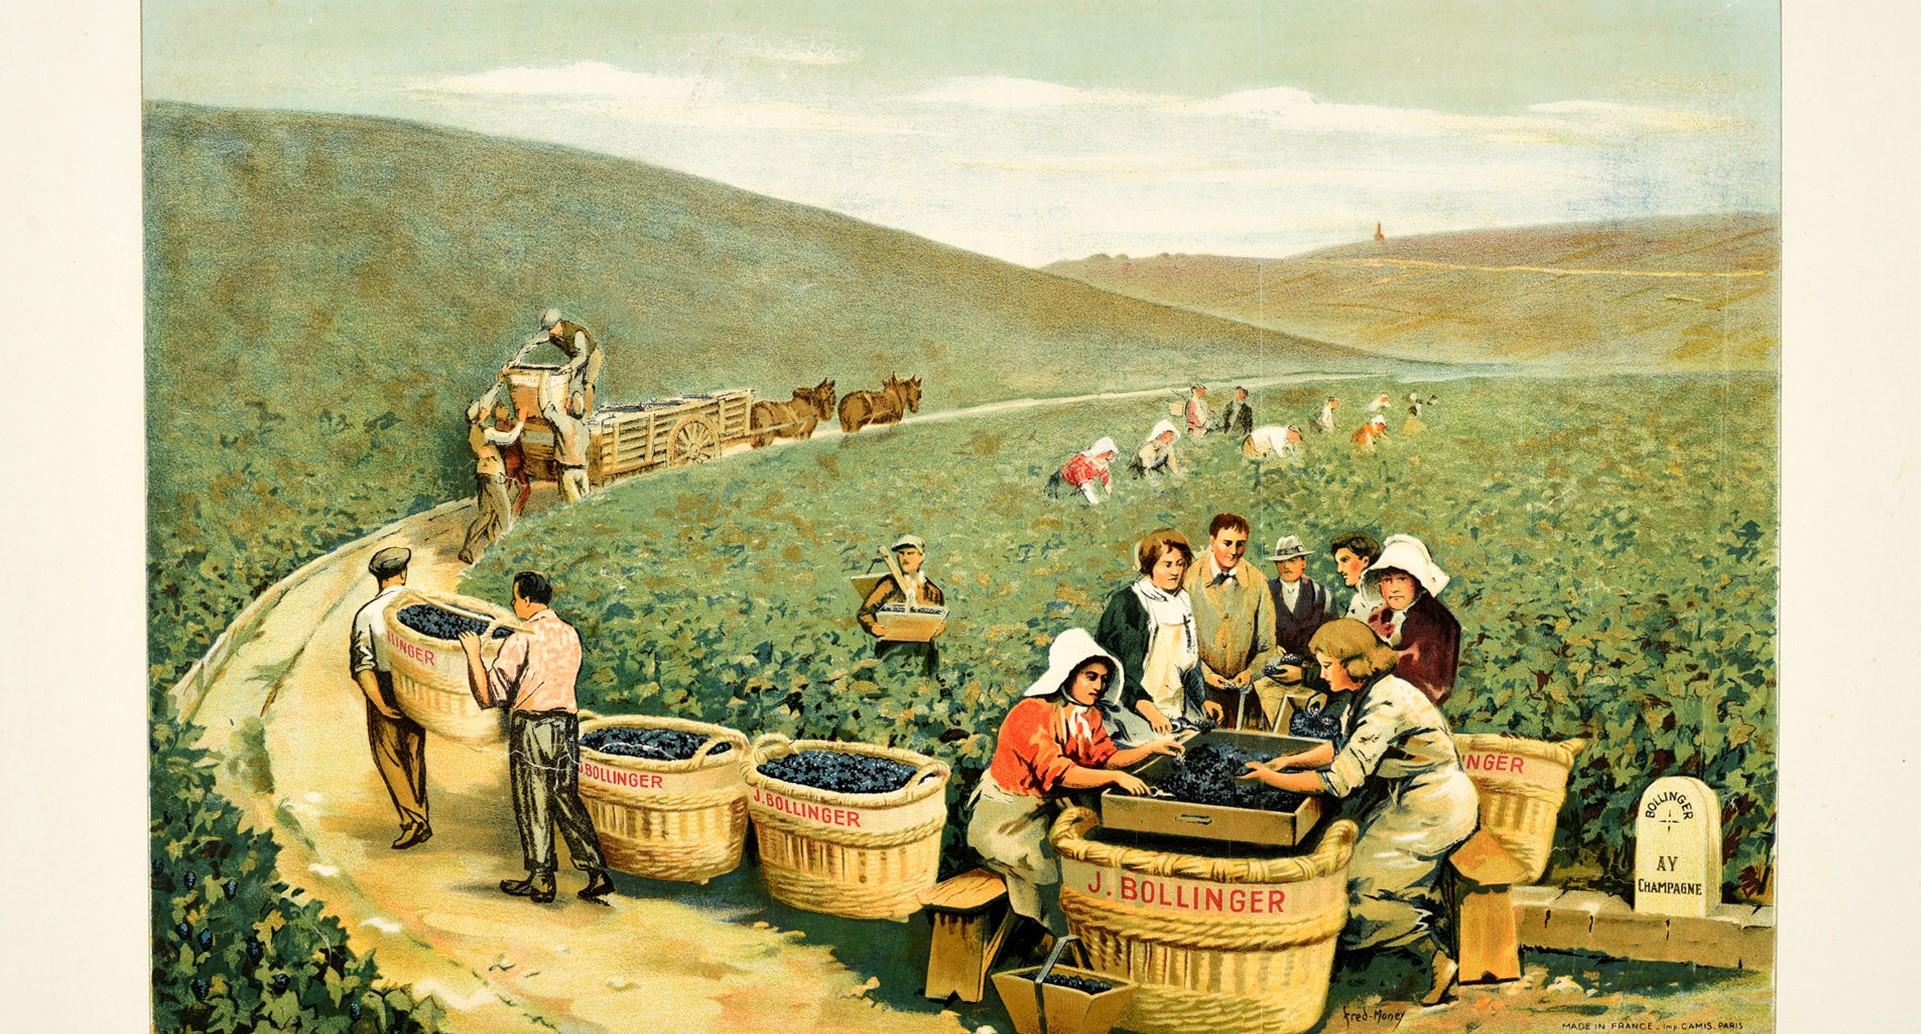 Original antique drink advertising poster featuring a great illustration by Fred Money (1882-1956) of a Bollinger champagne vineyard full of farm workers picking and sorting grapes and loading horse carts with baskets marked J. Bollinger full of